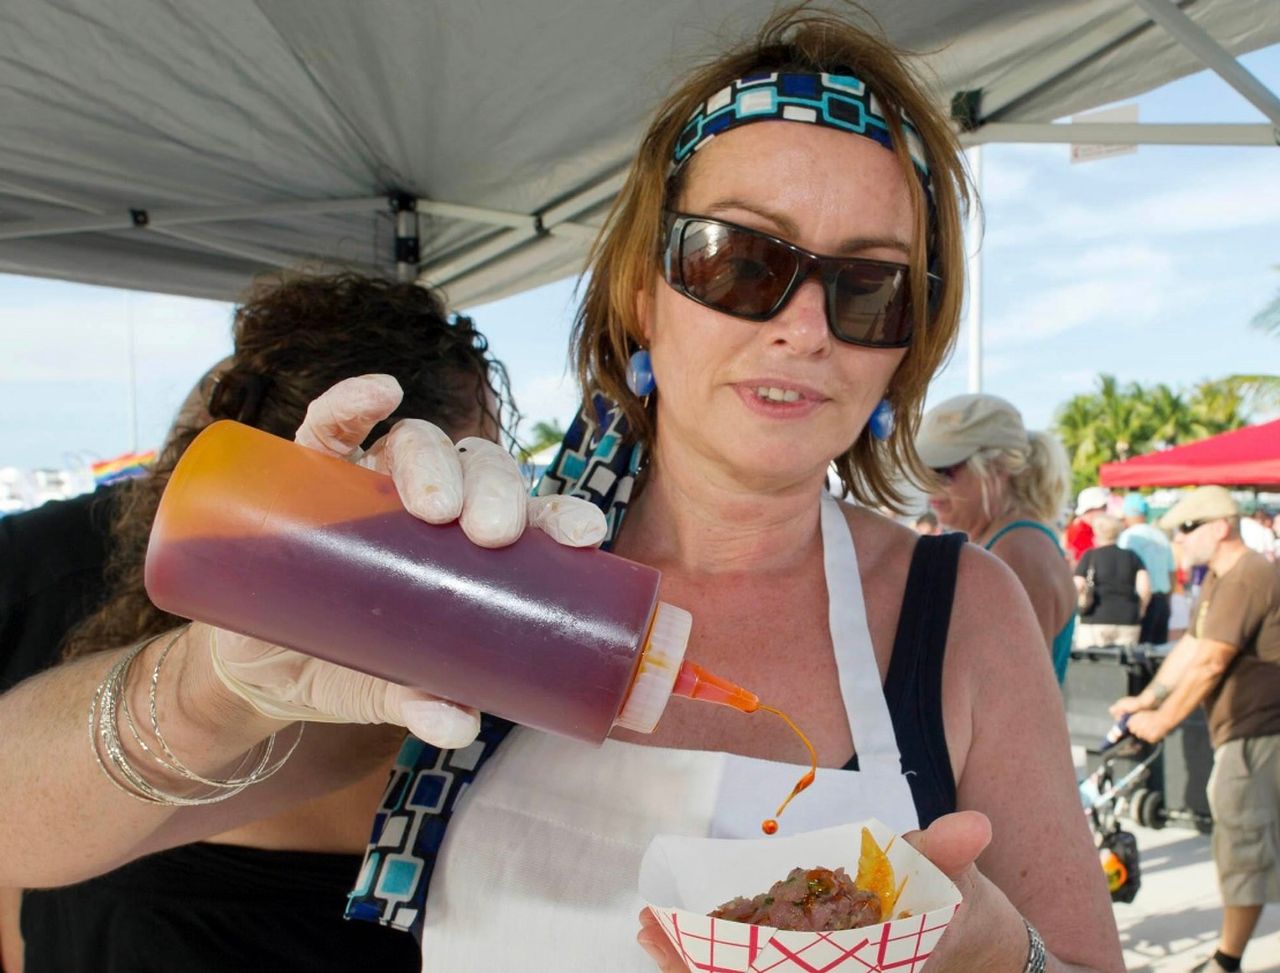 Maria Wevers serves up tasty bites from Grand Cafe at a local food festival. Photo: Rob O'Neal